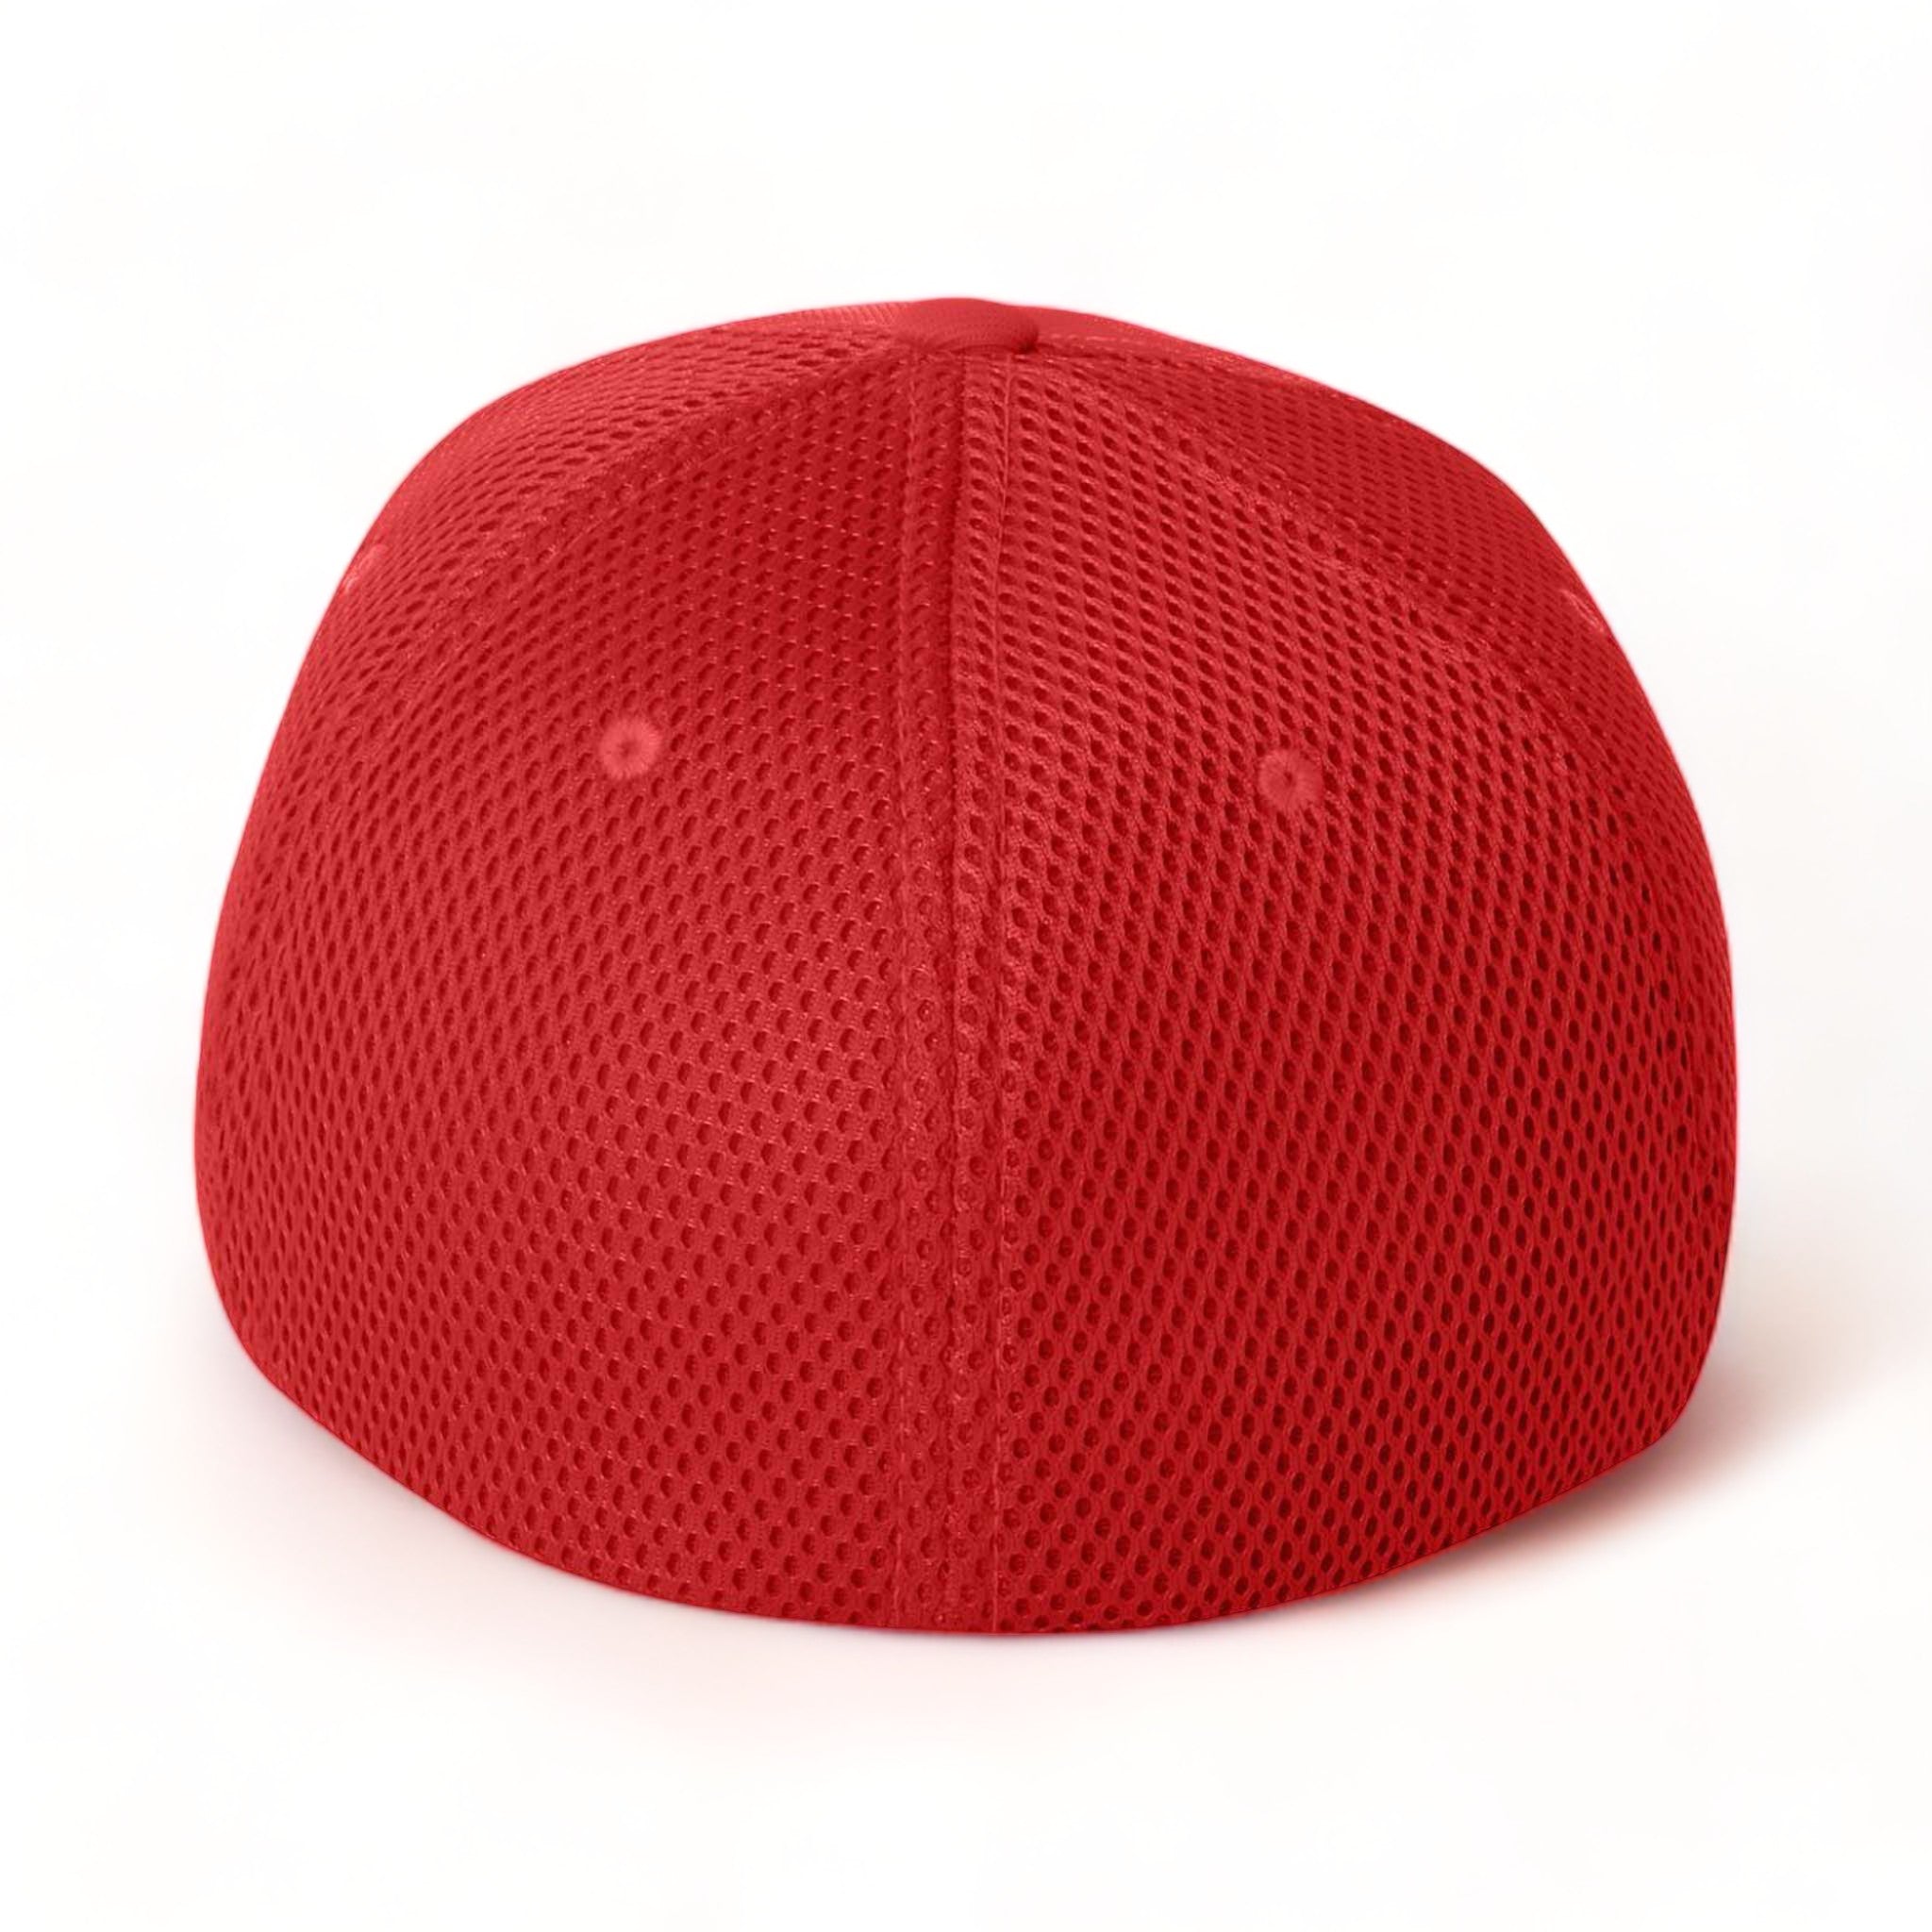 Back view of Flexfit 6533 custom hat in red